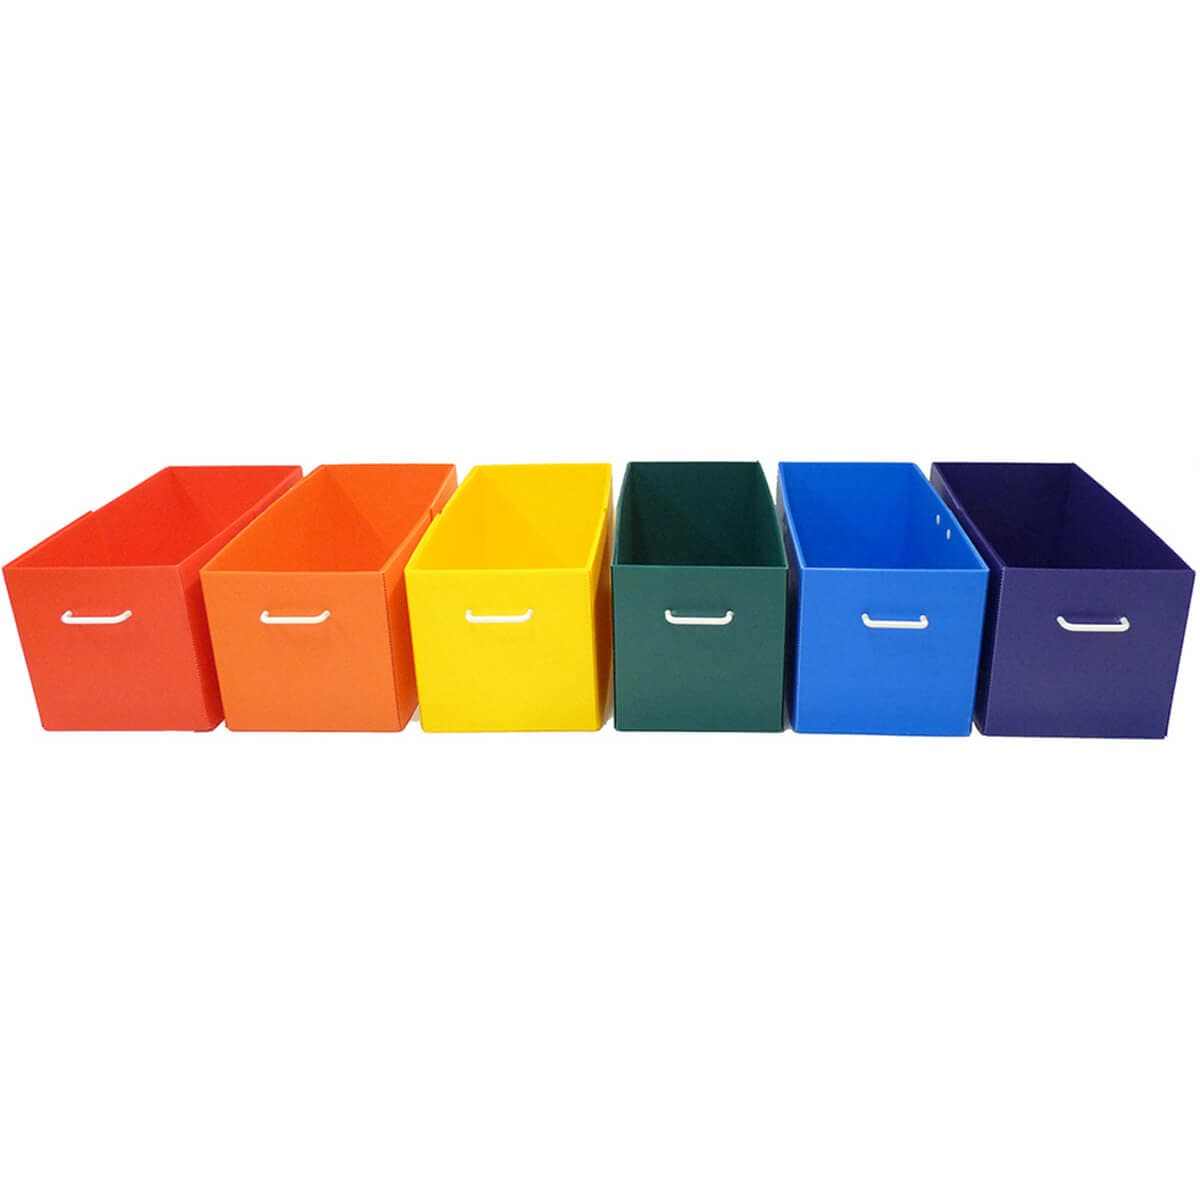 Six colorful standard storage bins for use with a stand and C&C guinea pig cage